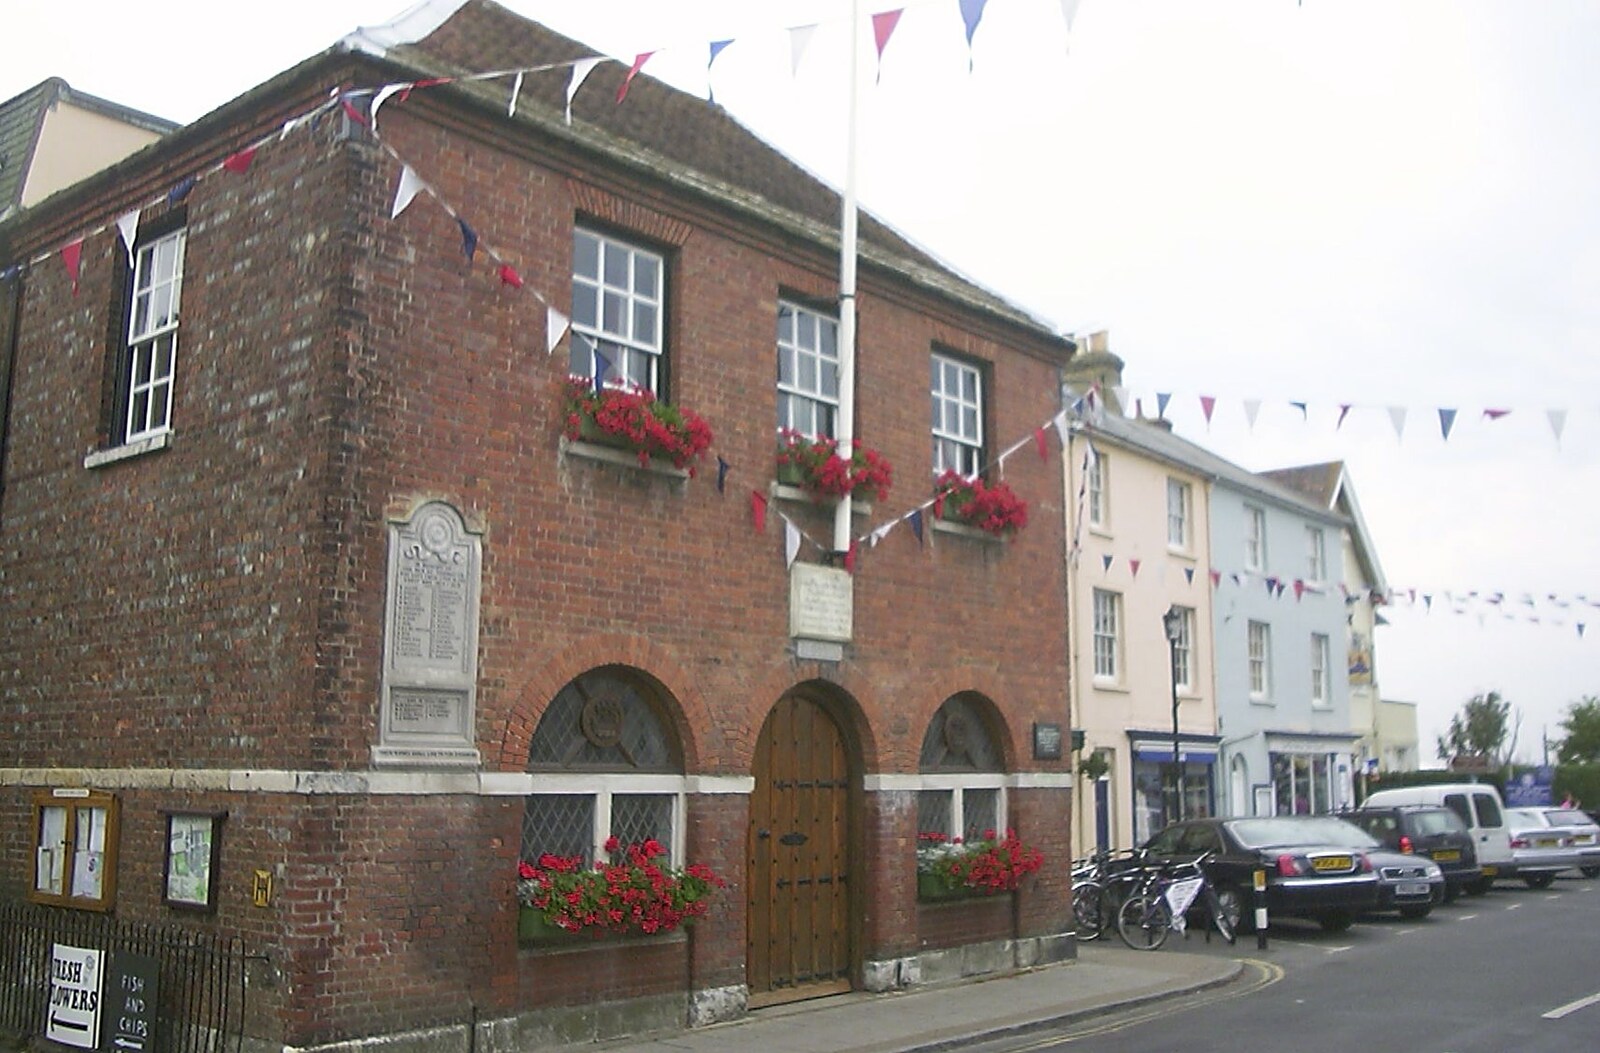 The old Customs House in Yarmouth from Cowes Weekend, Cowes, Isle of Wight - 7th August 2004